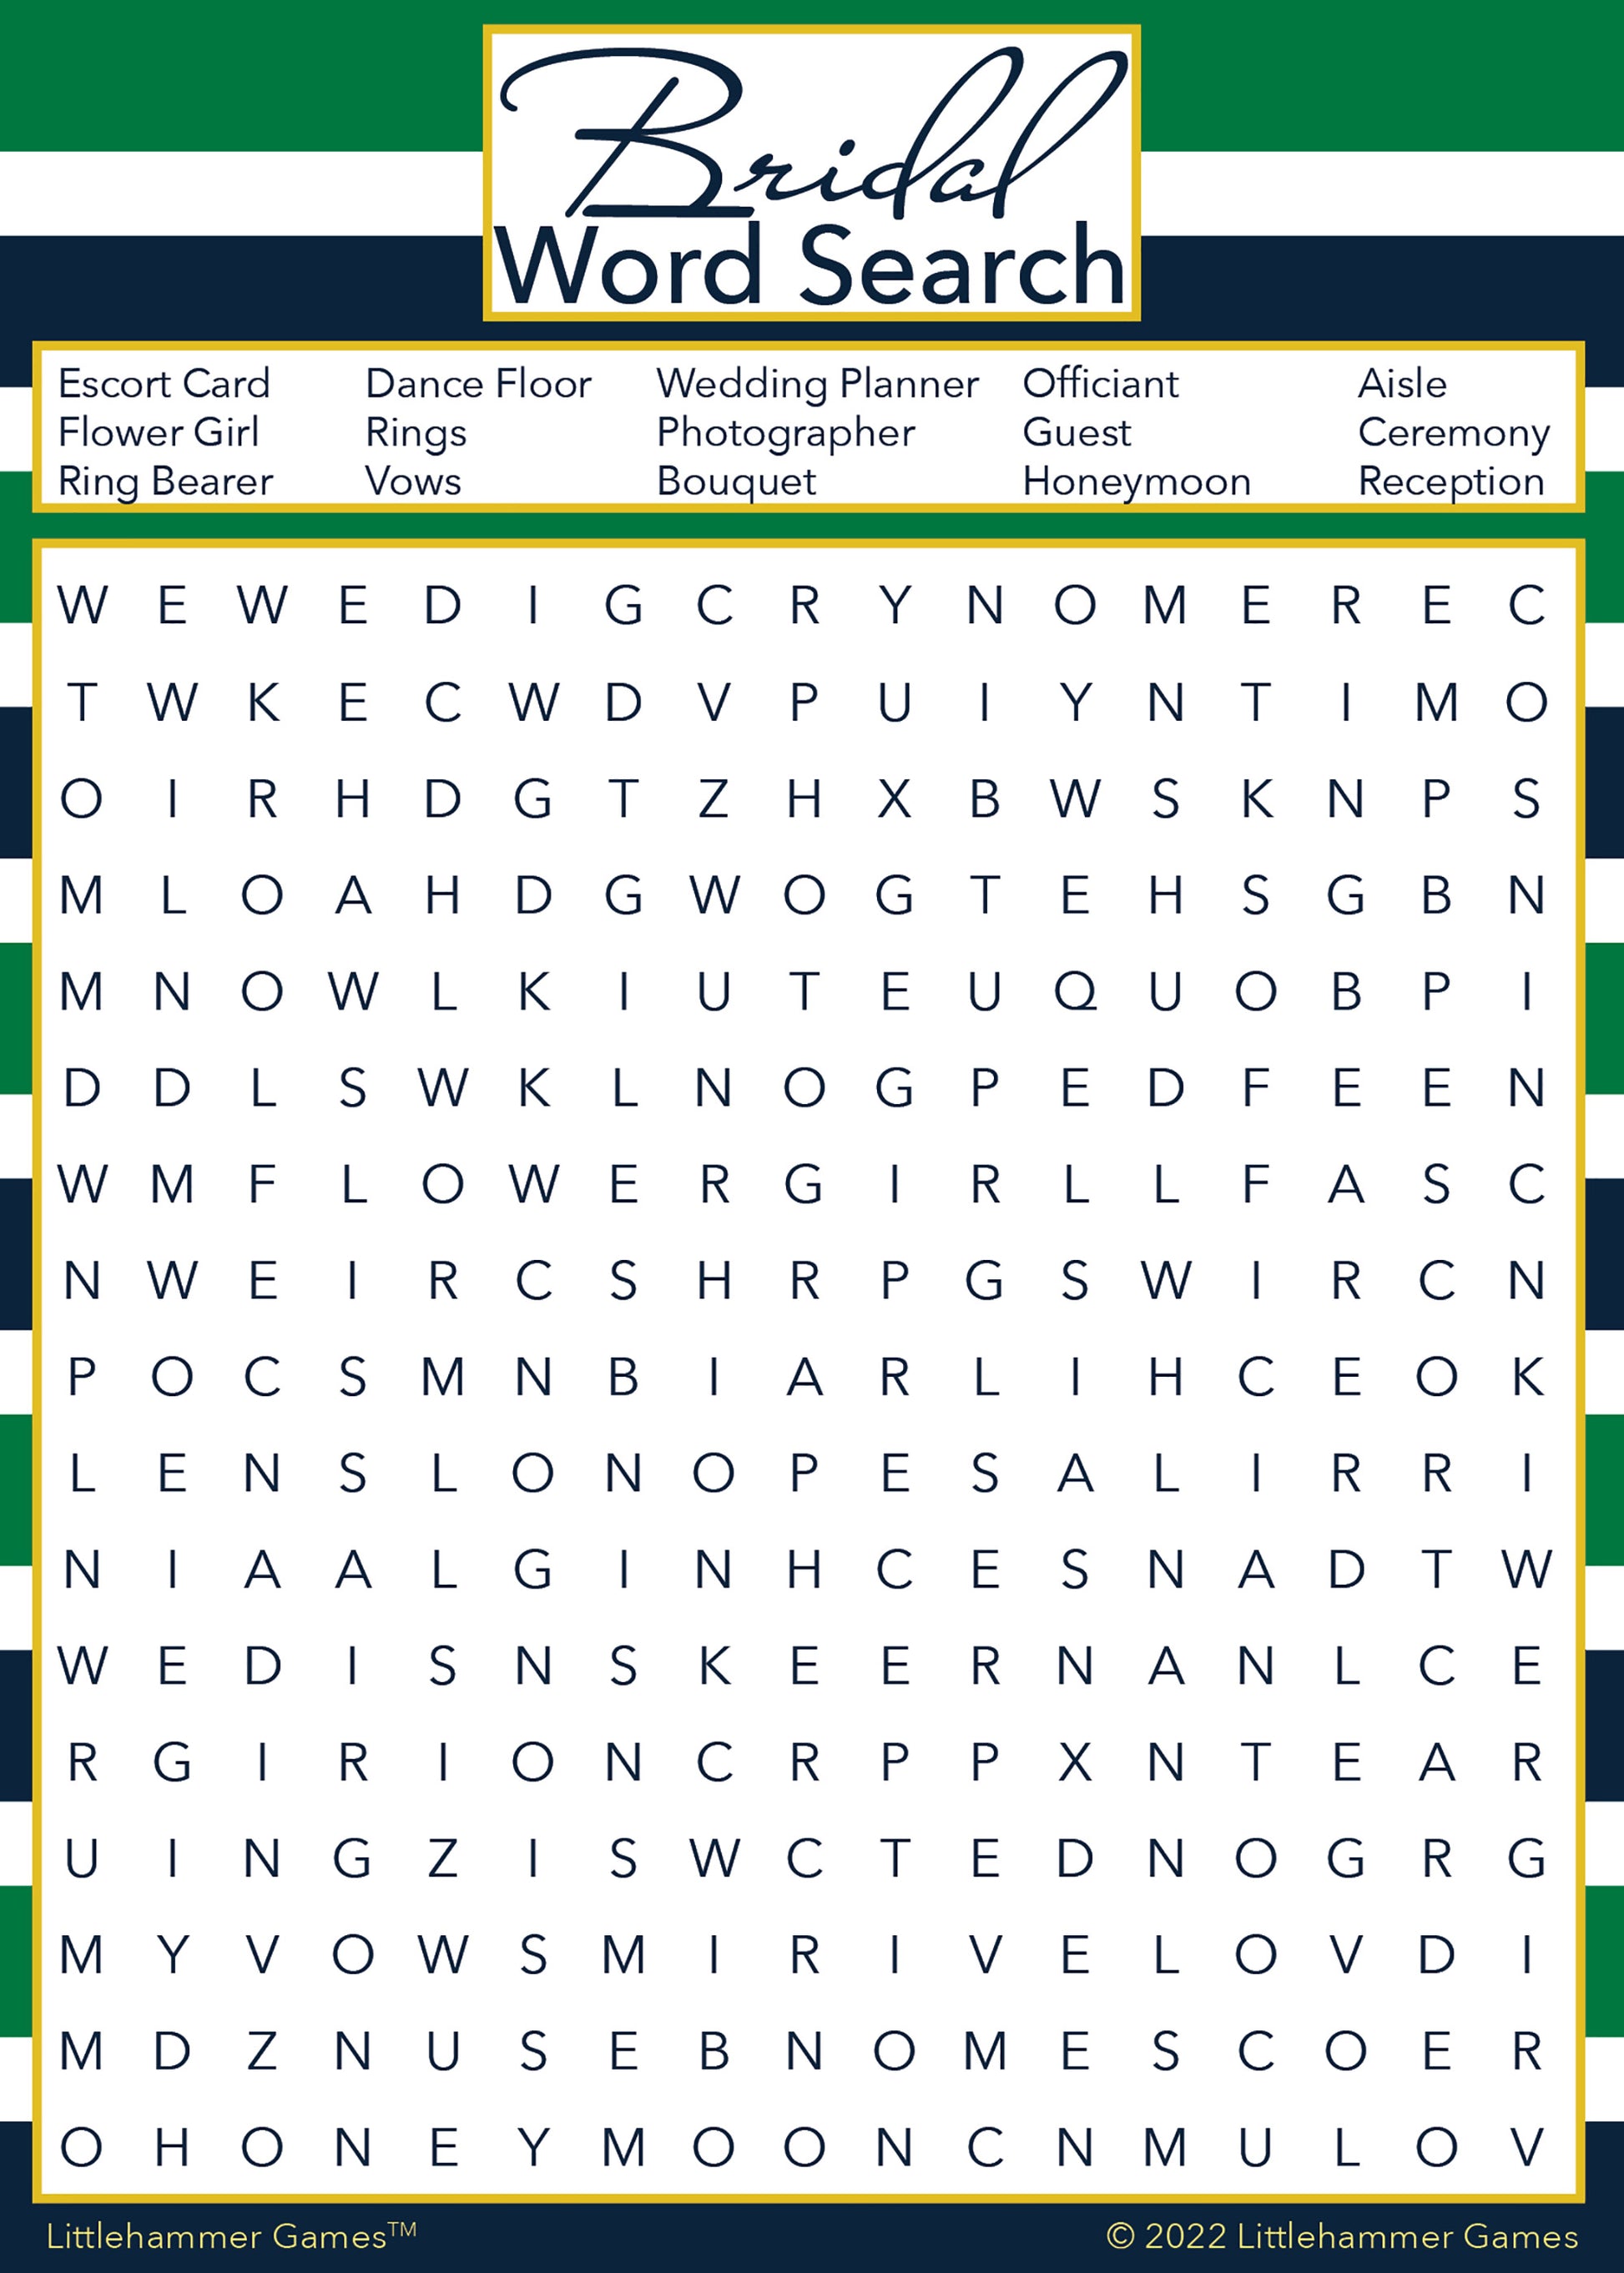 Bridal Word Search game card with a green and navy-striped background